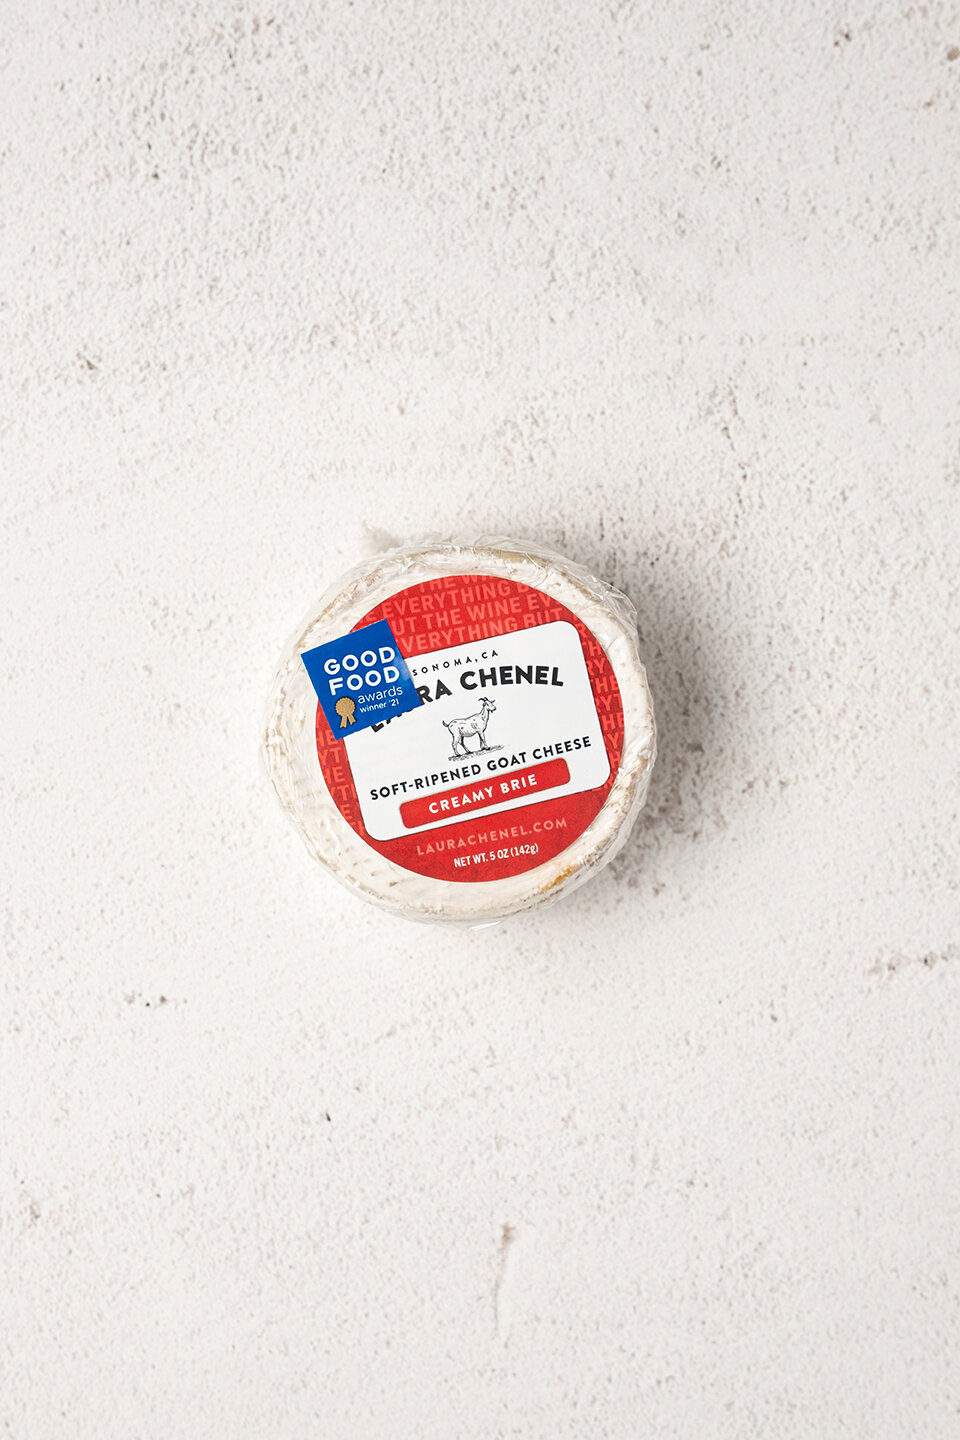 Laura Chenel Goat Cheese Brie $5.49 